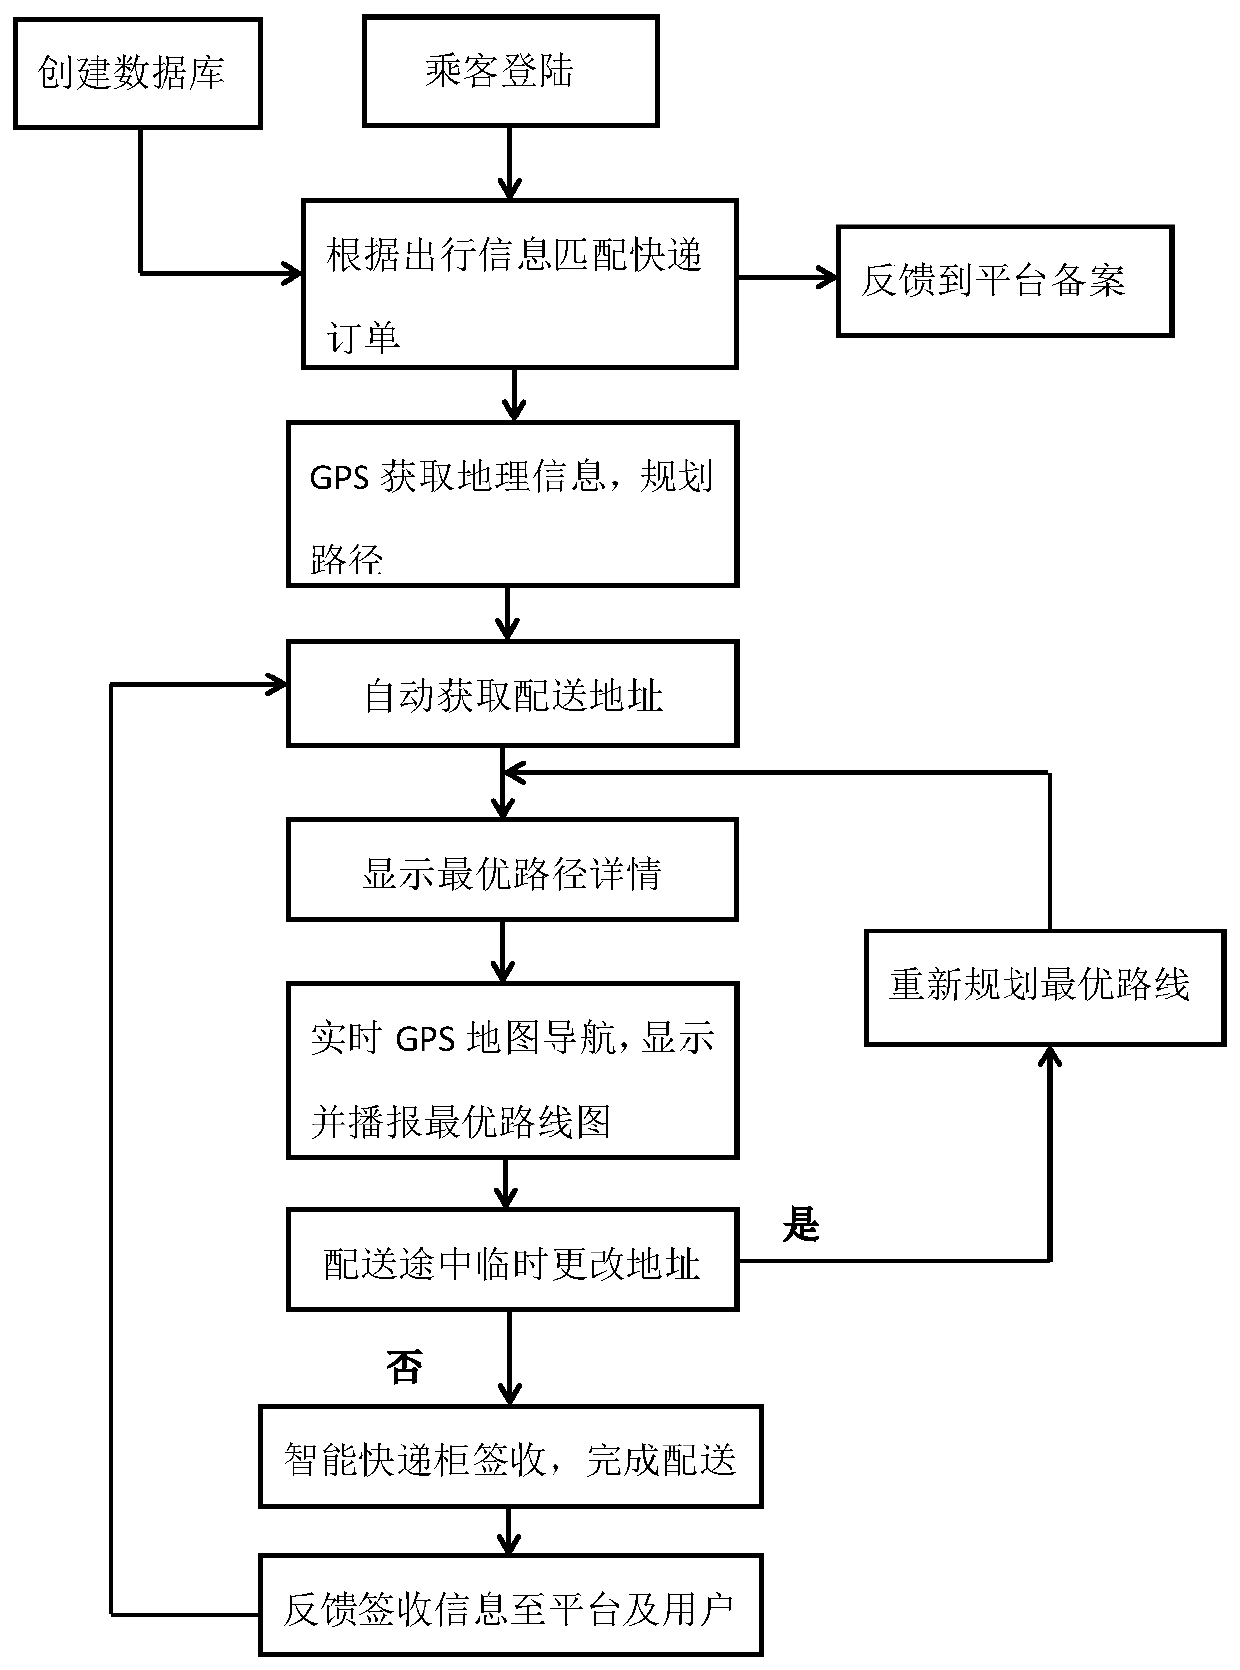 Crowdsourcing express delivery system and method based on a rail vehicle